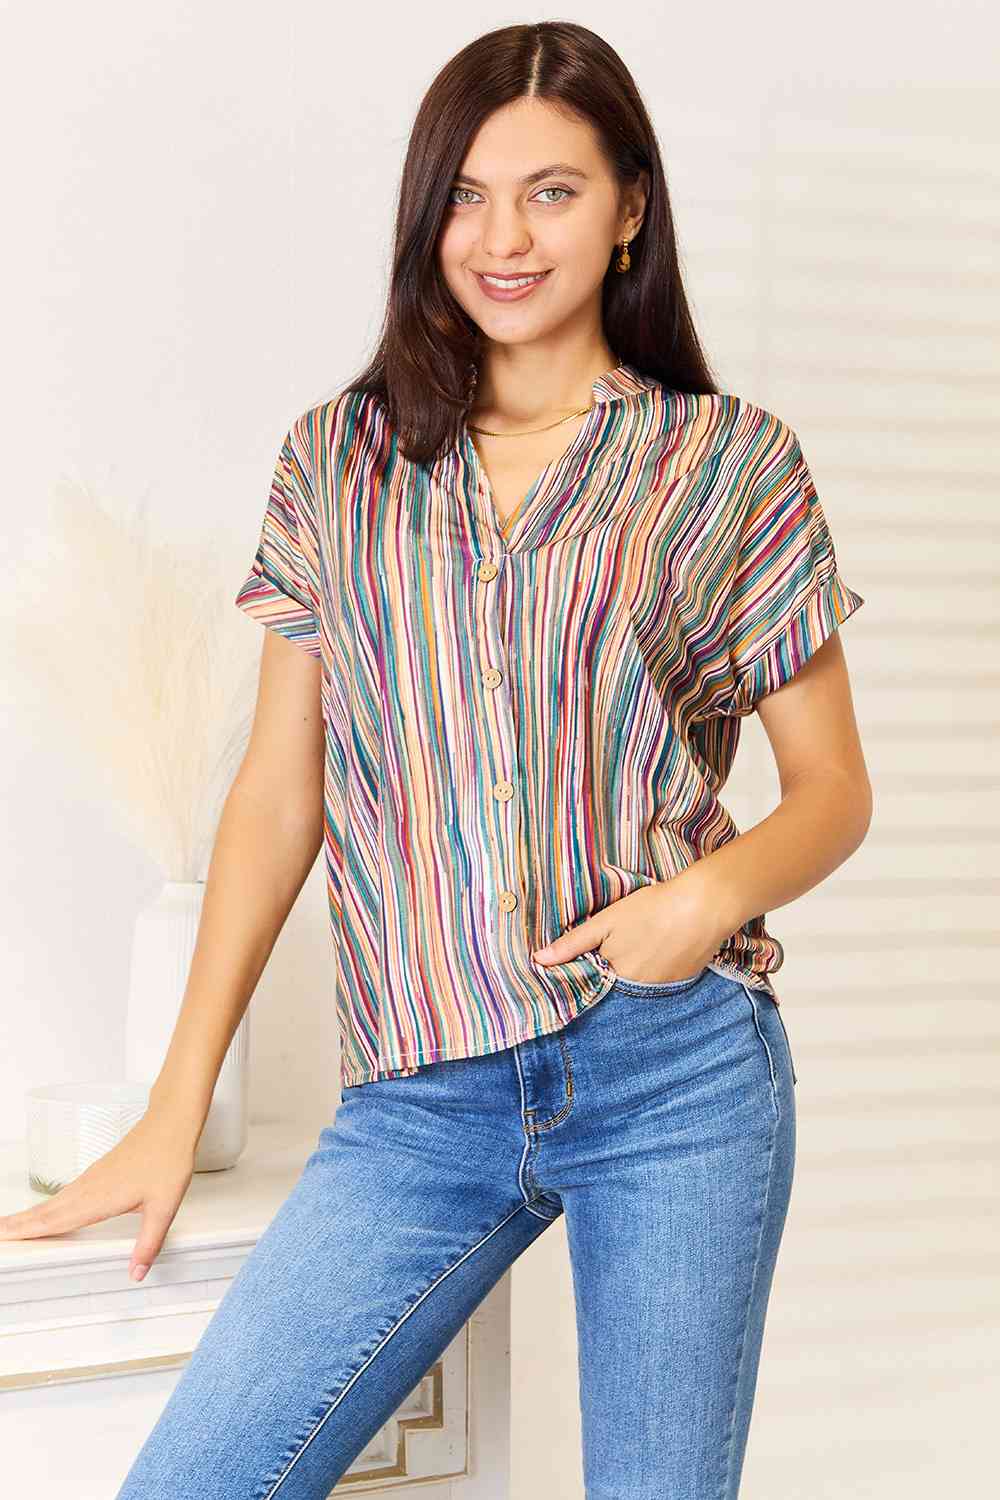 Double Take Multicolored Stripe Notched Neck Top - Tigbuls Variety Fashion